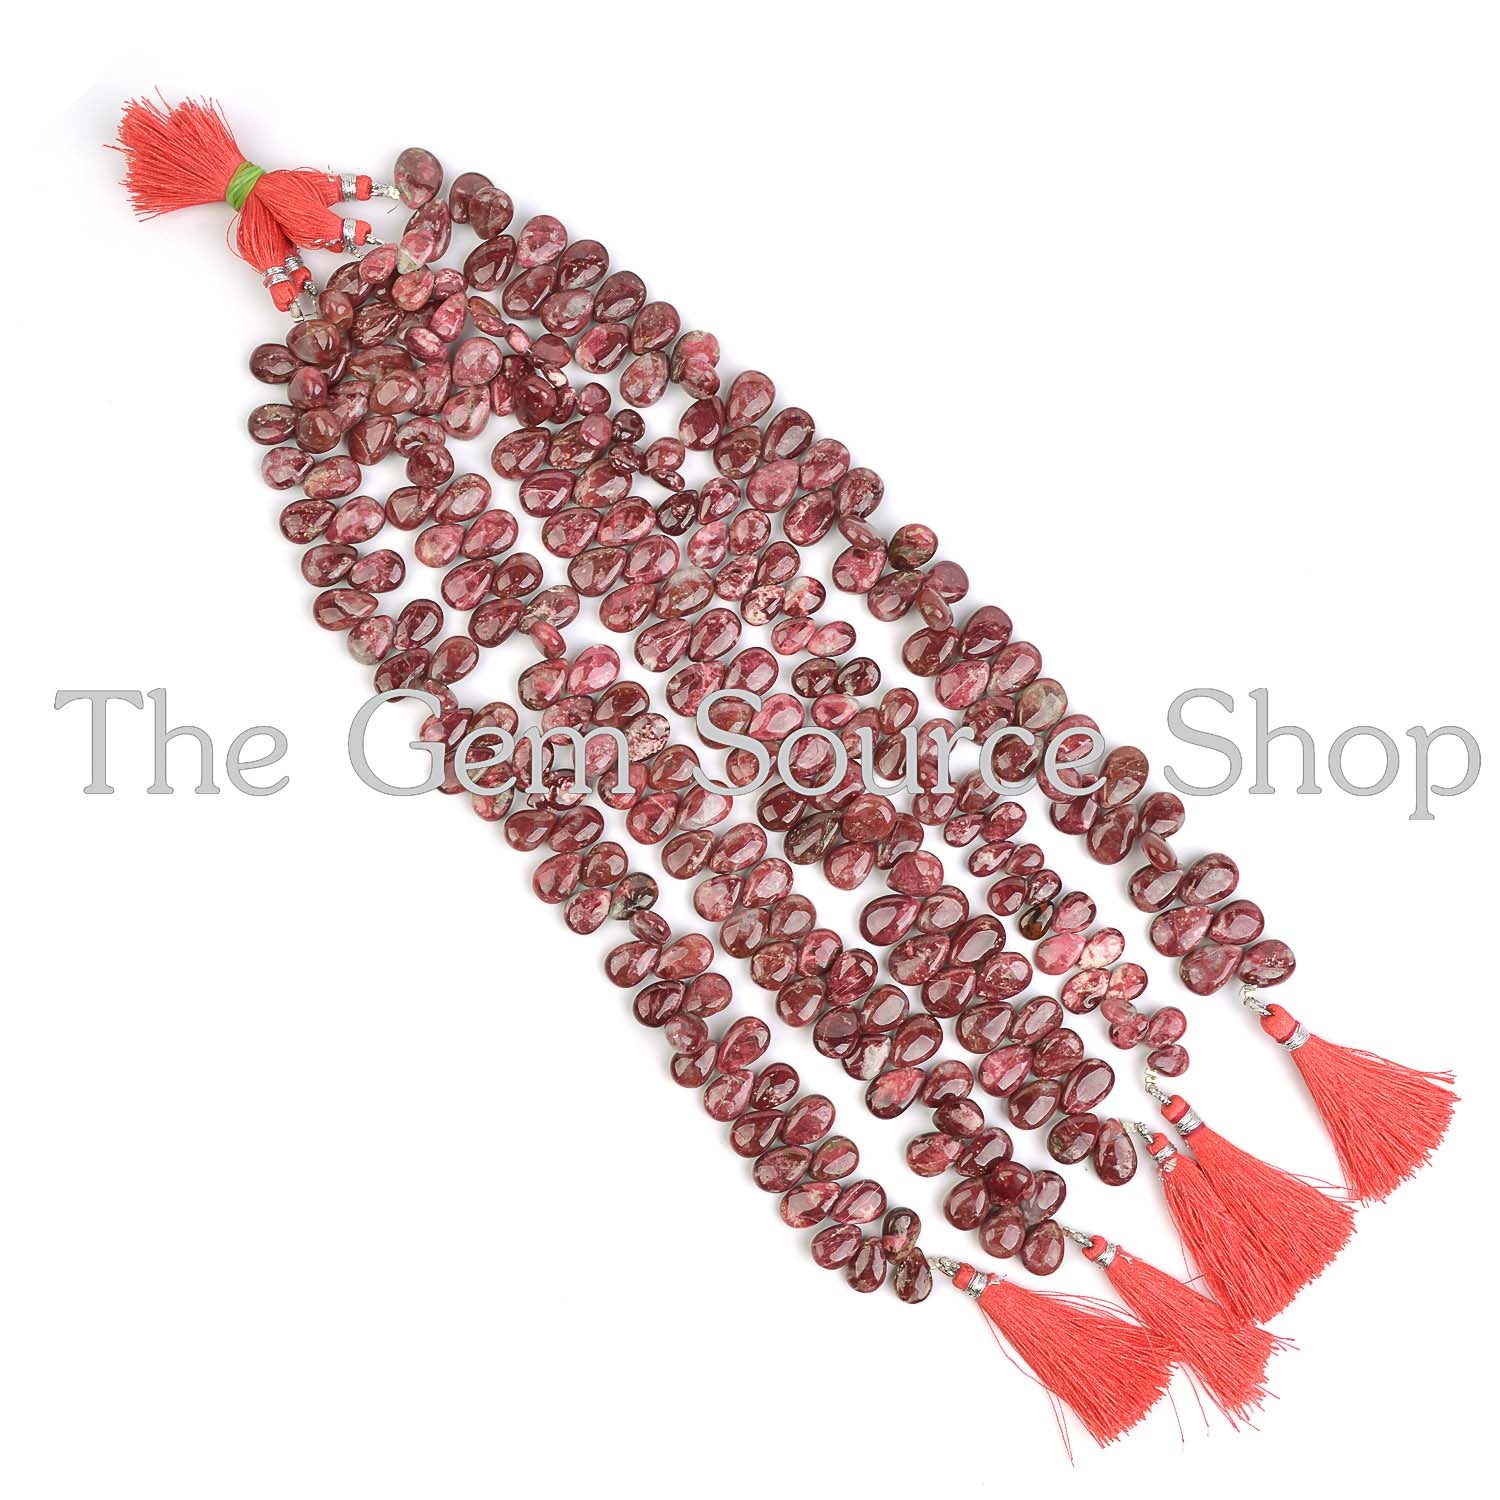 Natural Thulite Plain Smooth Pear Beads, Gemstone Beads, Beads For Jewelry